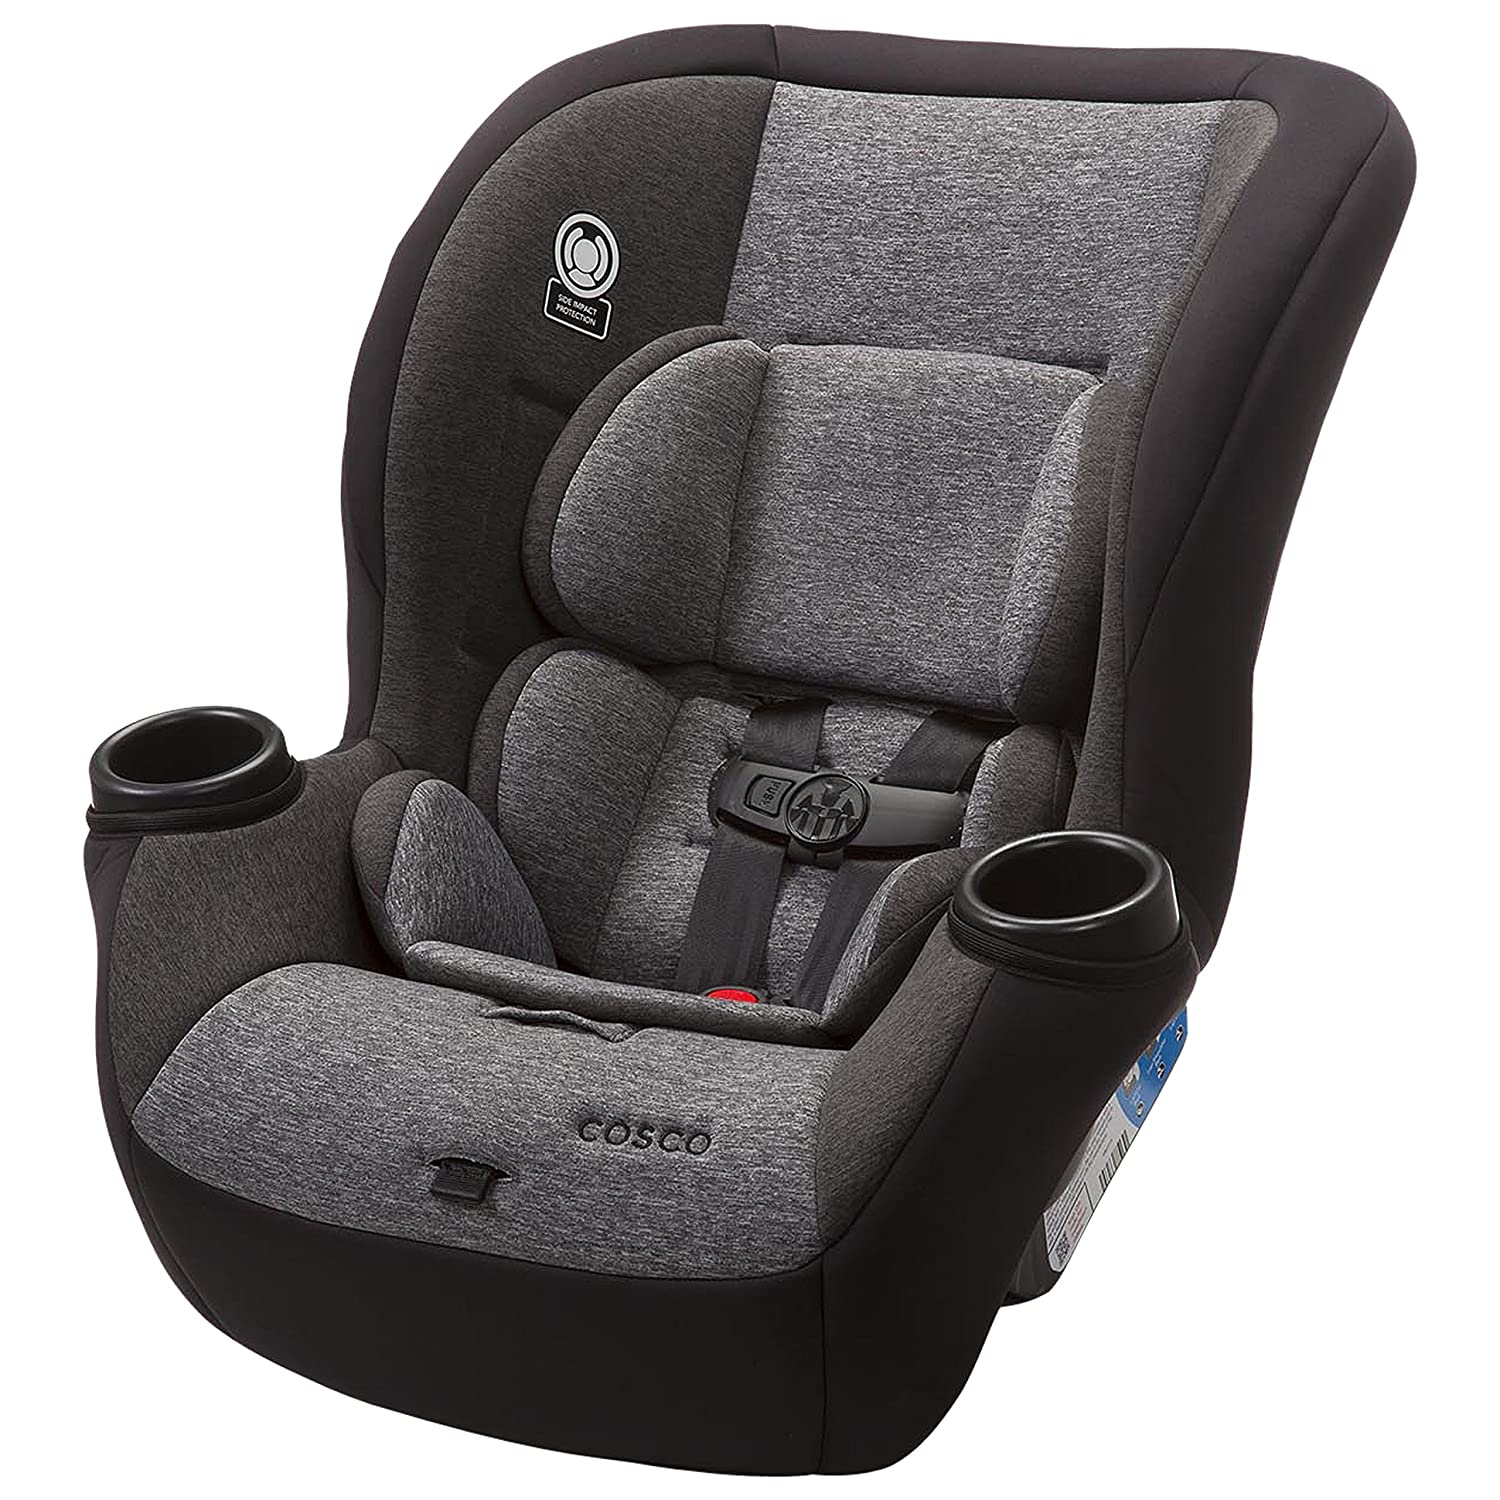 Top 5 Best Affordable Convertible Car Seats Reviews in 2023 5